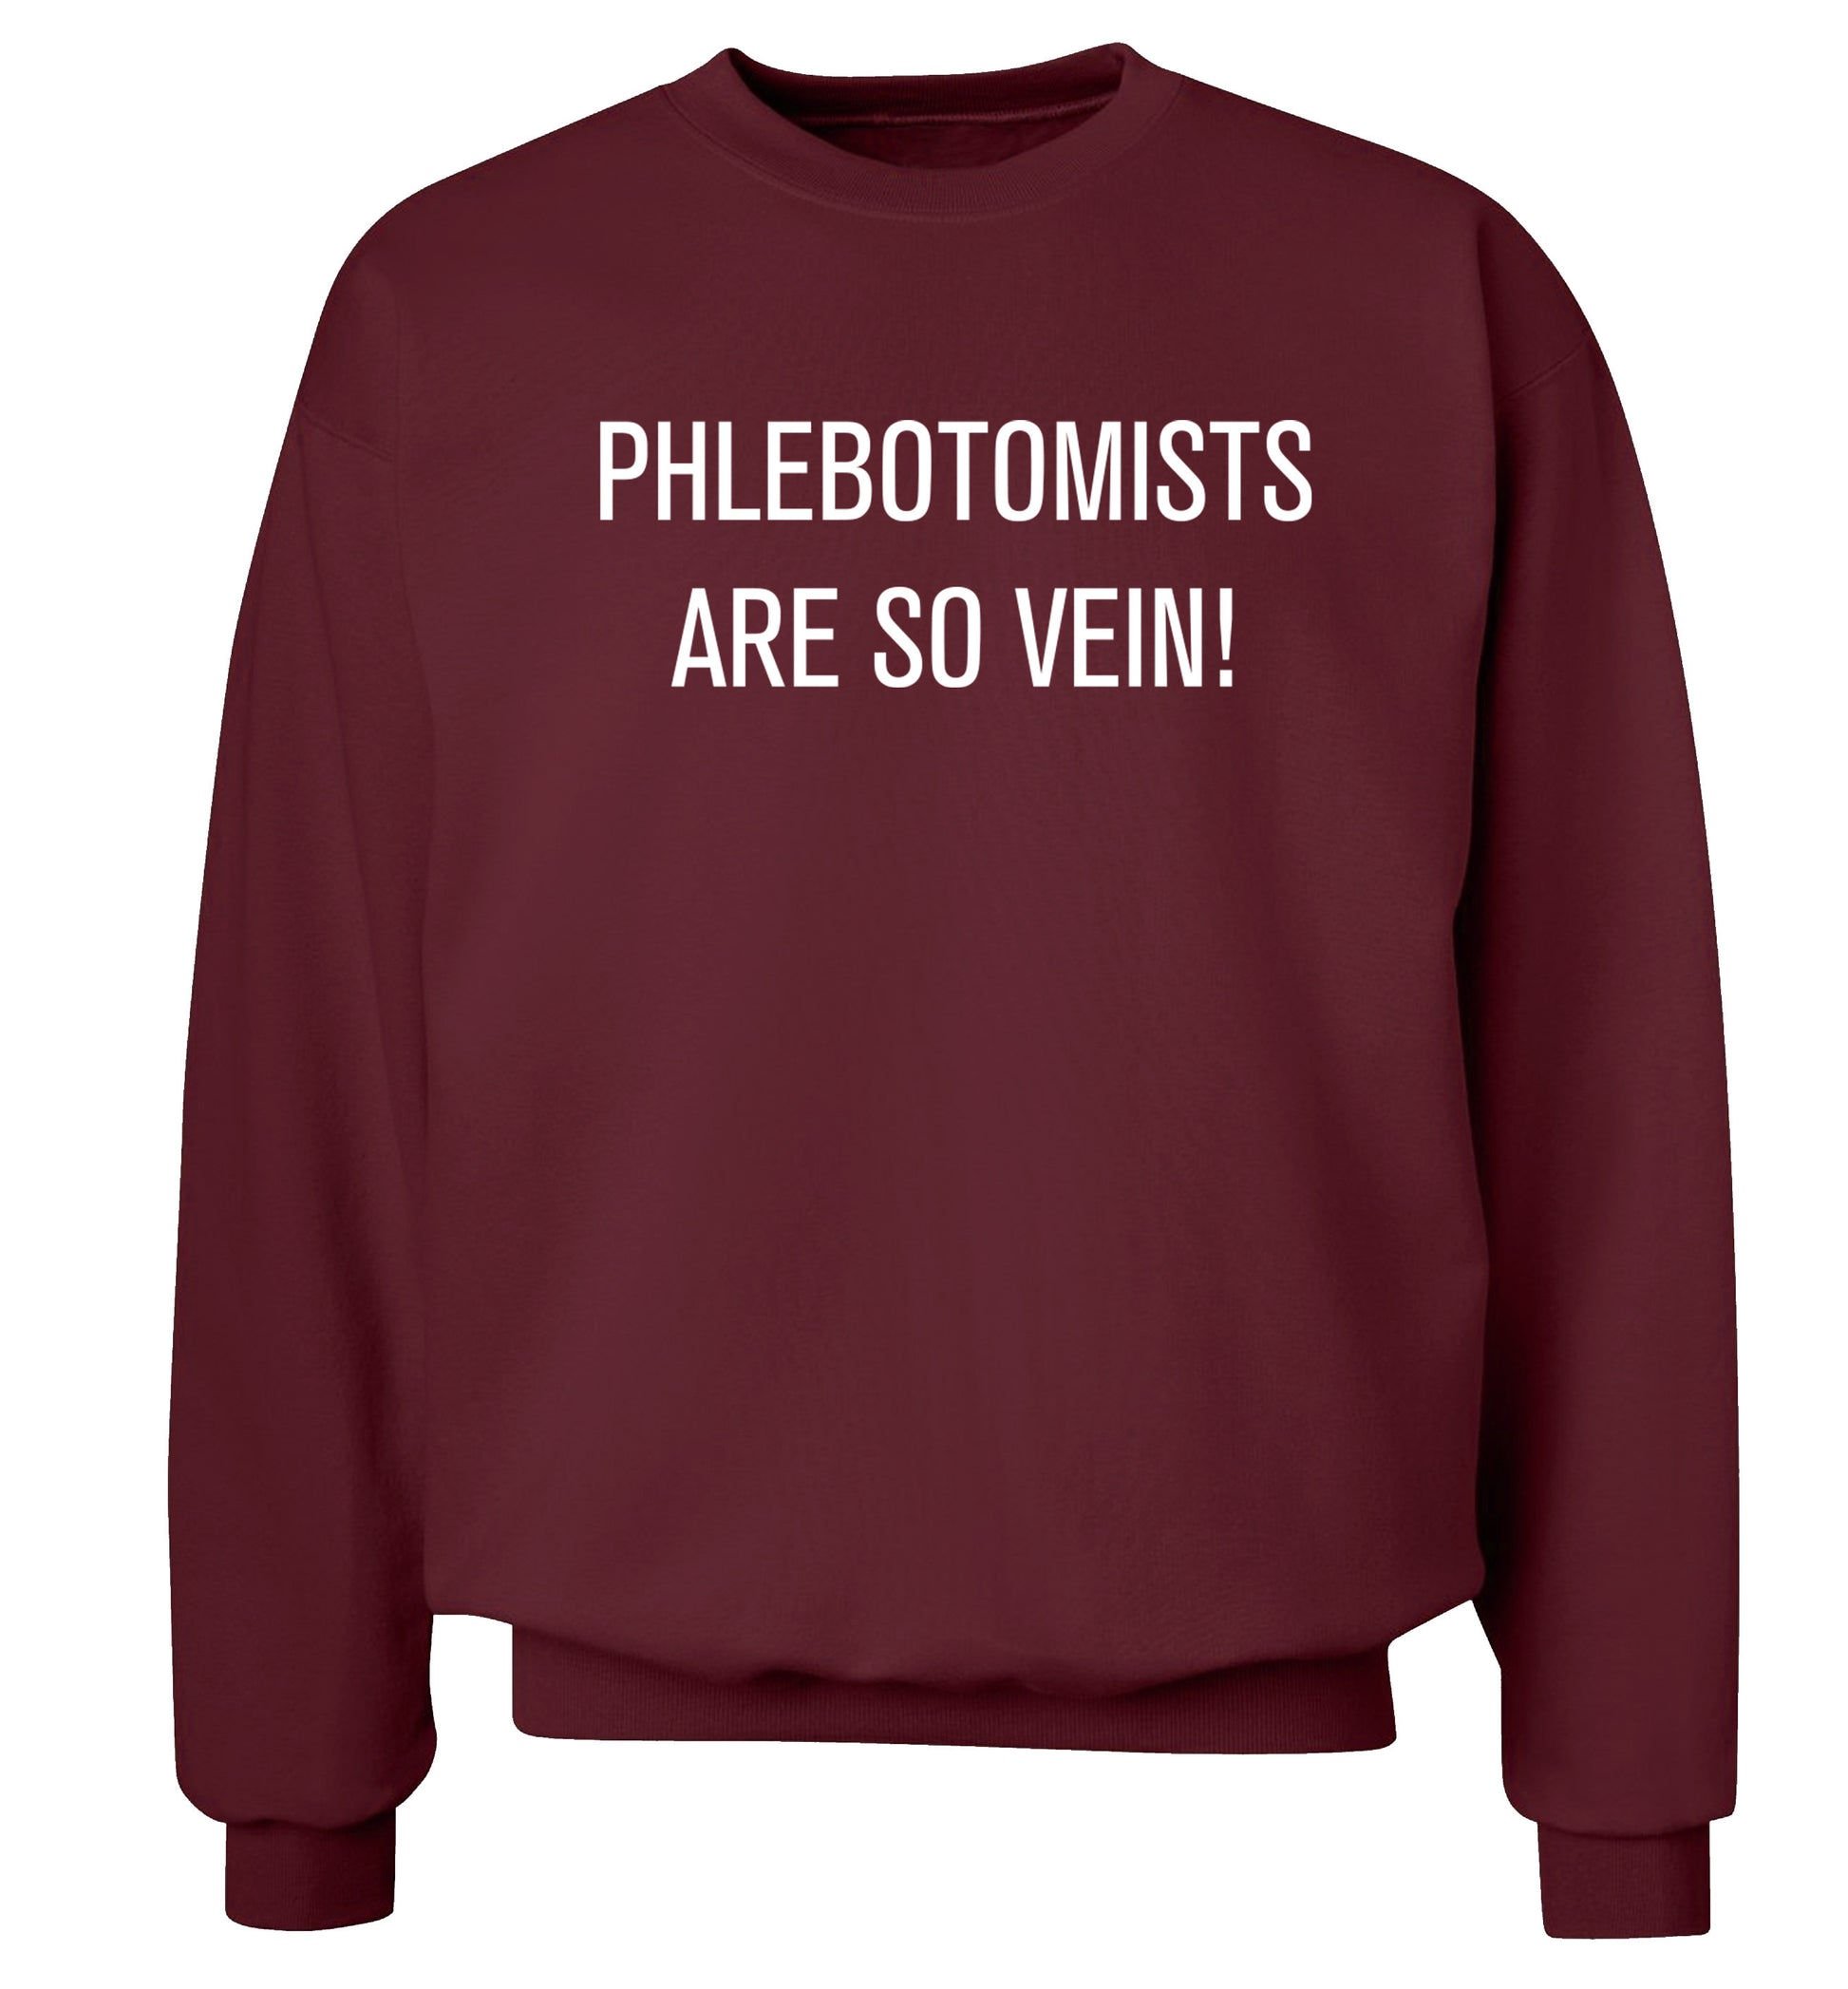 Phlebotomists are so vein! Adult's unisex maroon Sweater 2XL